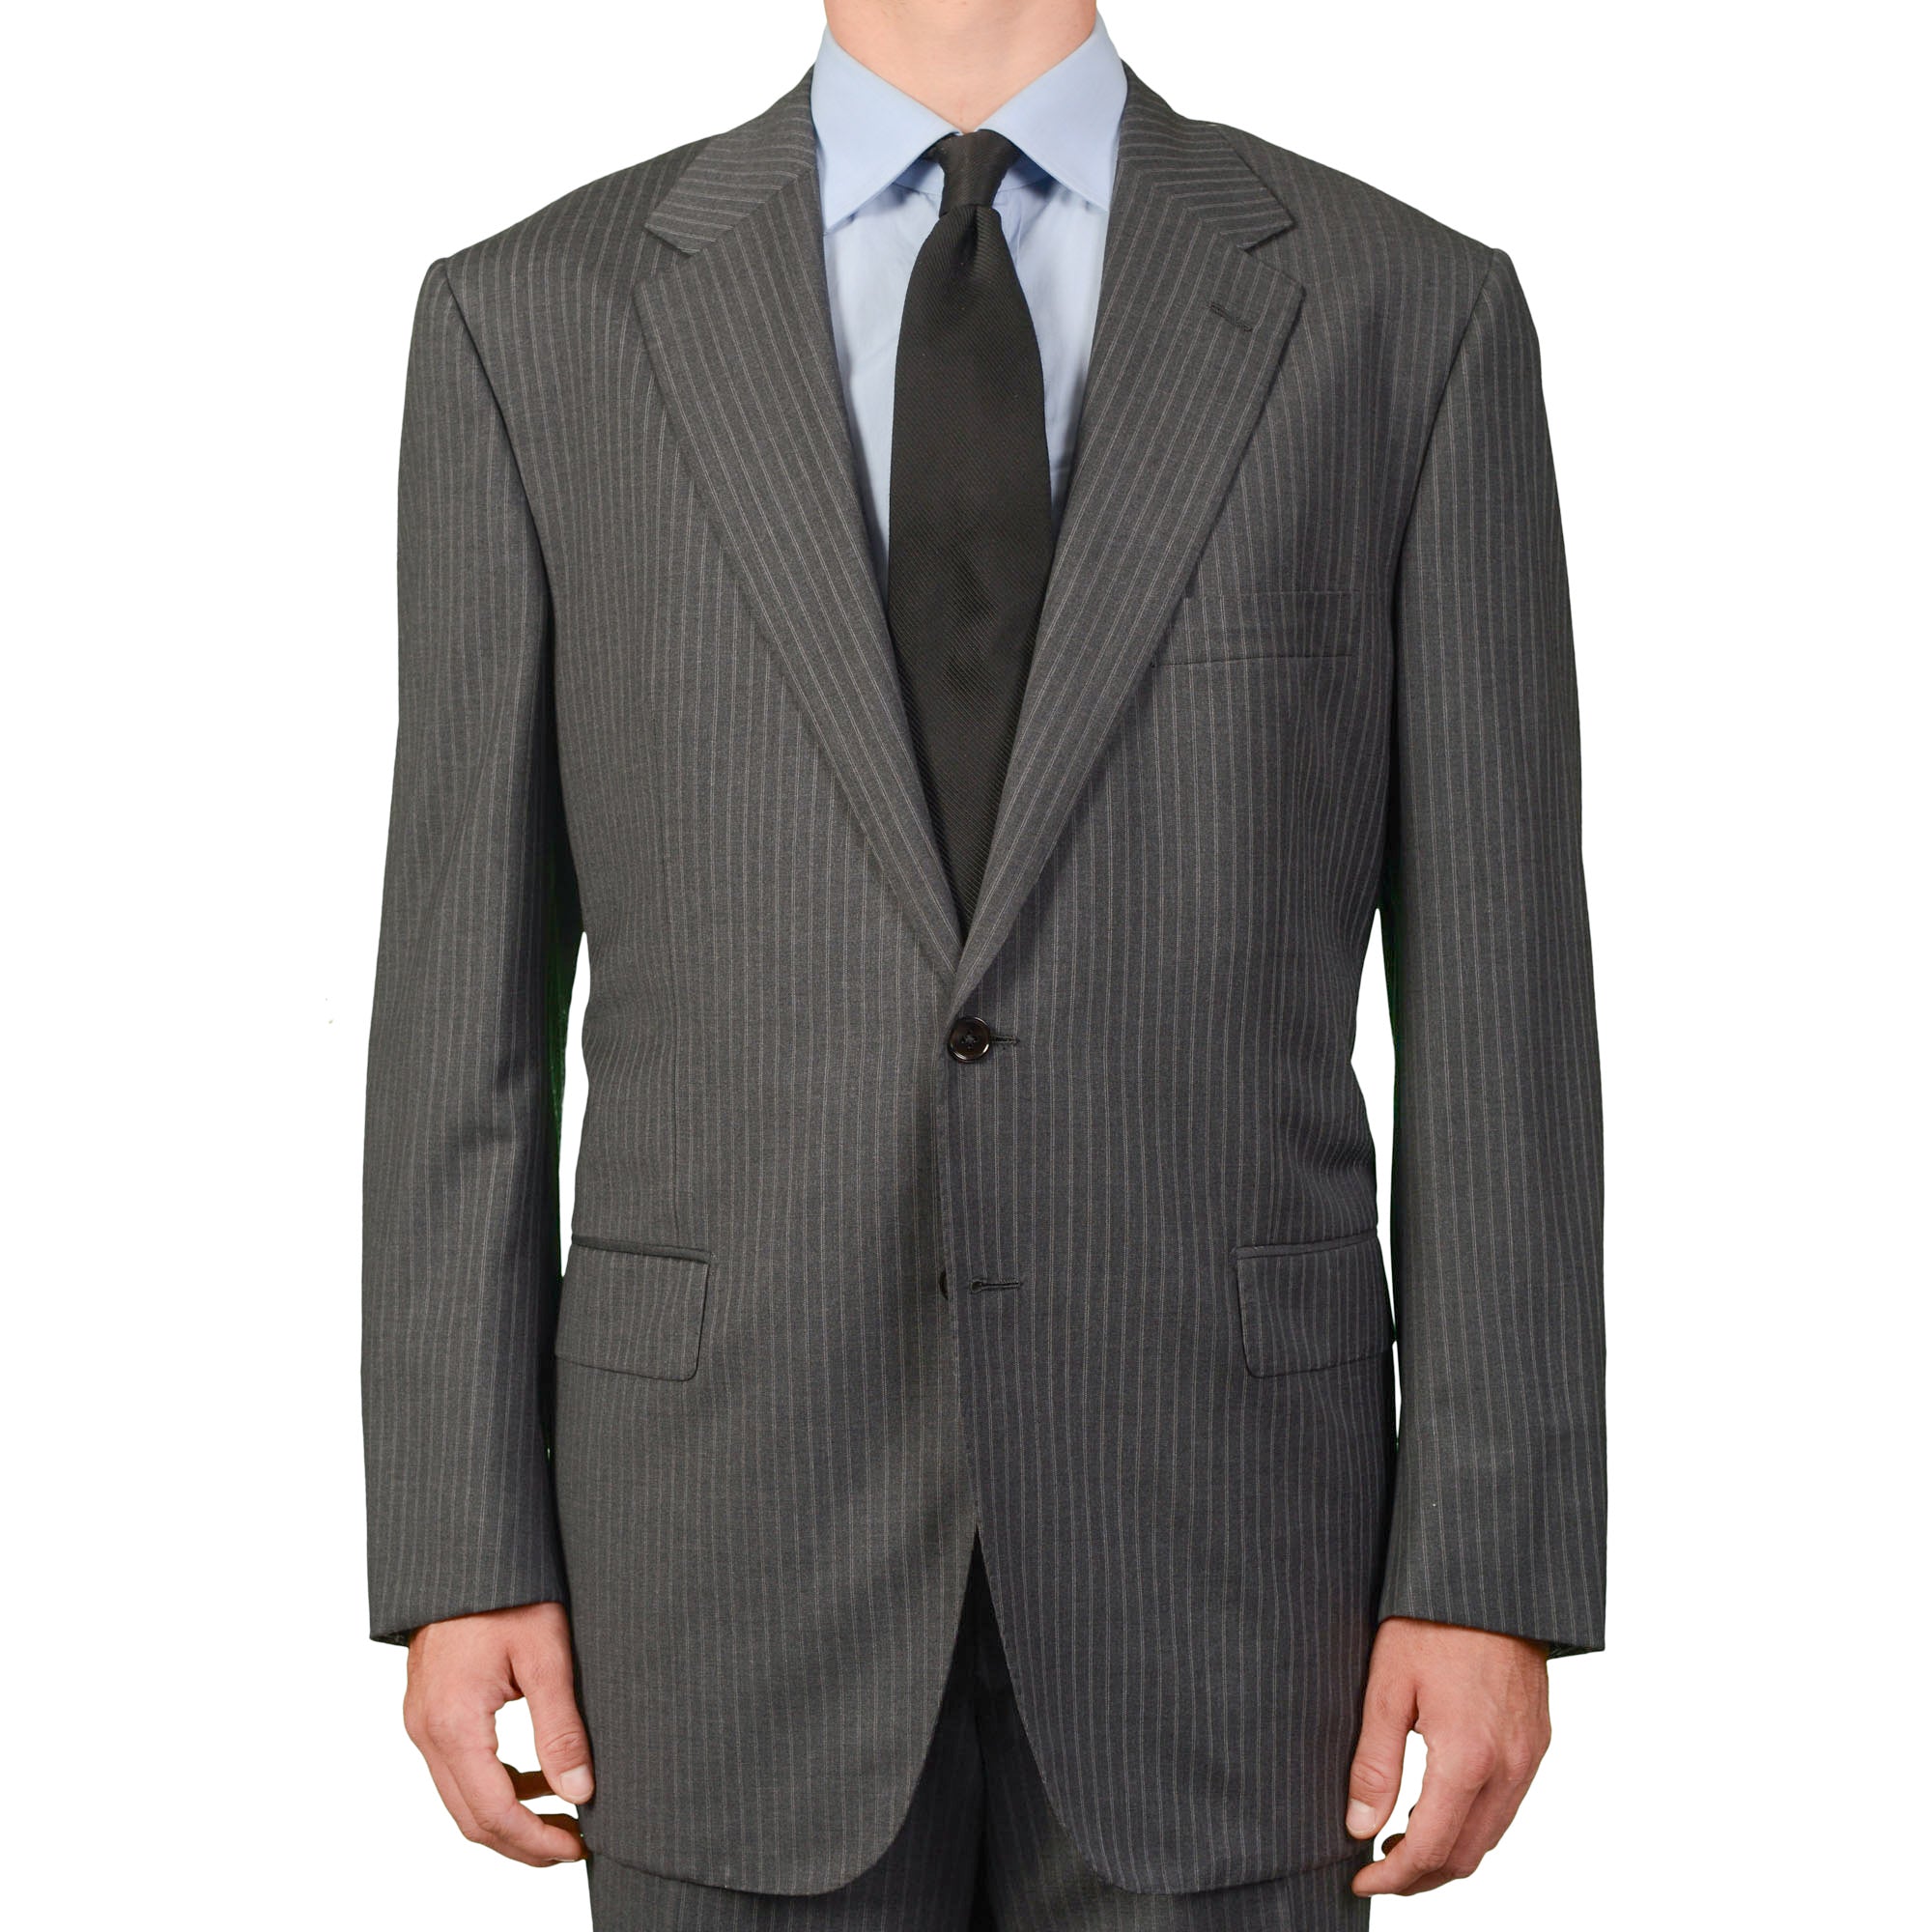 D'AVENZA for ACCADEMYA Handmade Gray Striped Wool Suit EU 60 NEW US 50 D'AVENZA